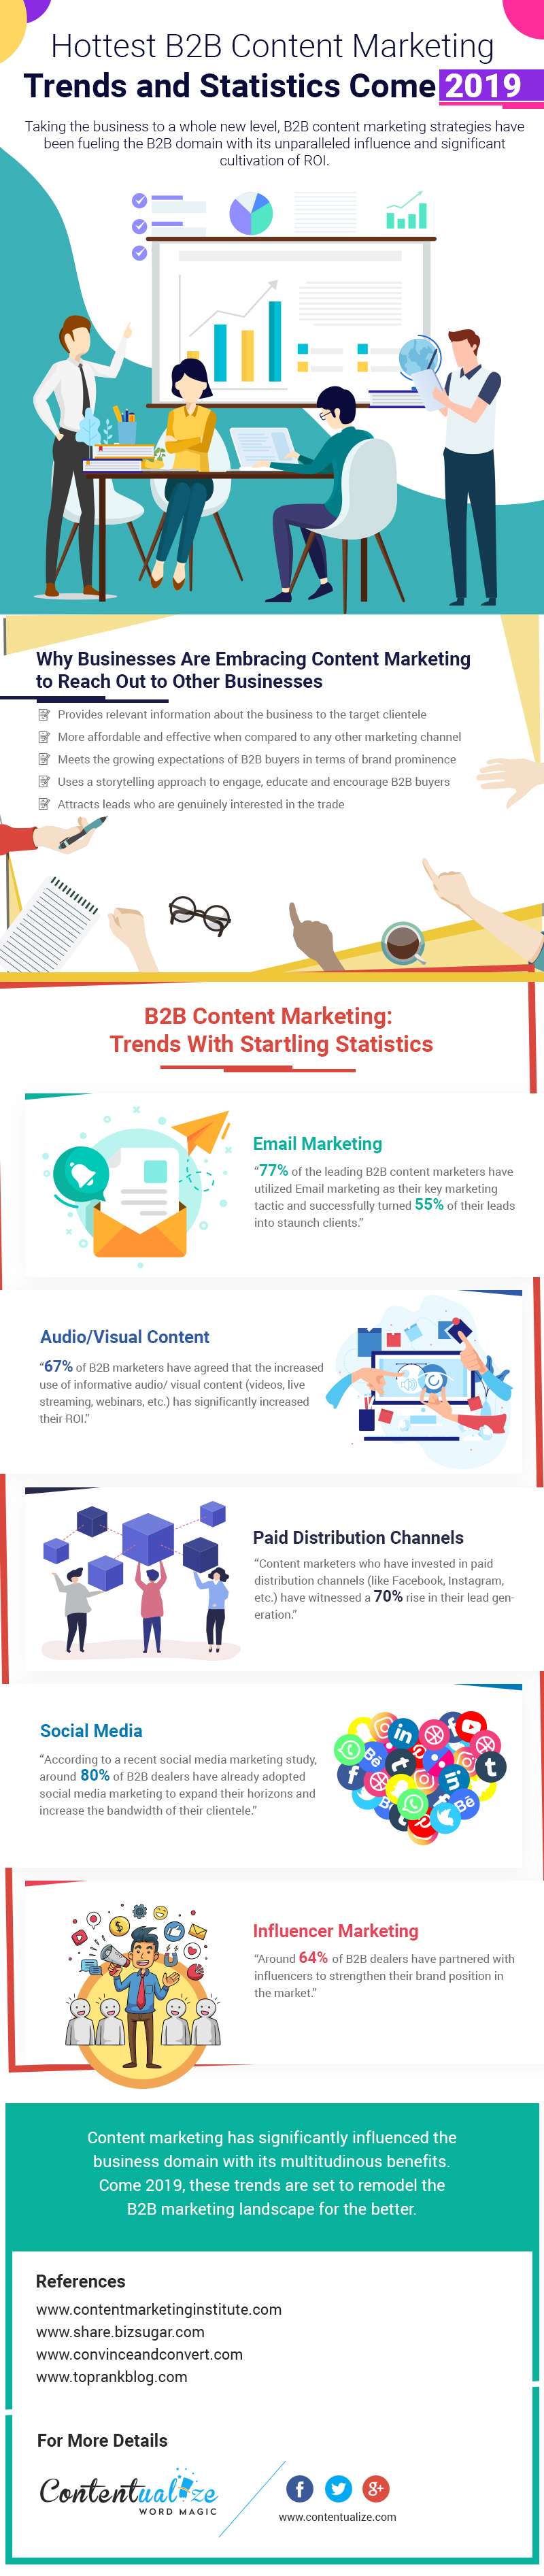 Hottest-B2B-Content-Marketing-Trends-and-Statistics-in-2019